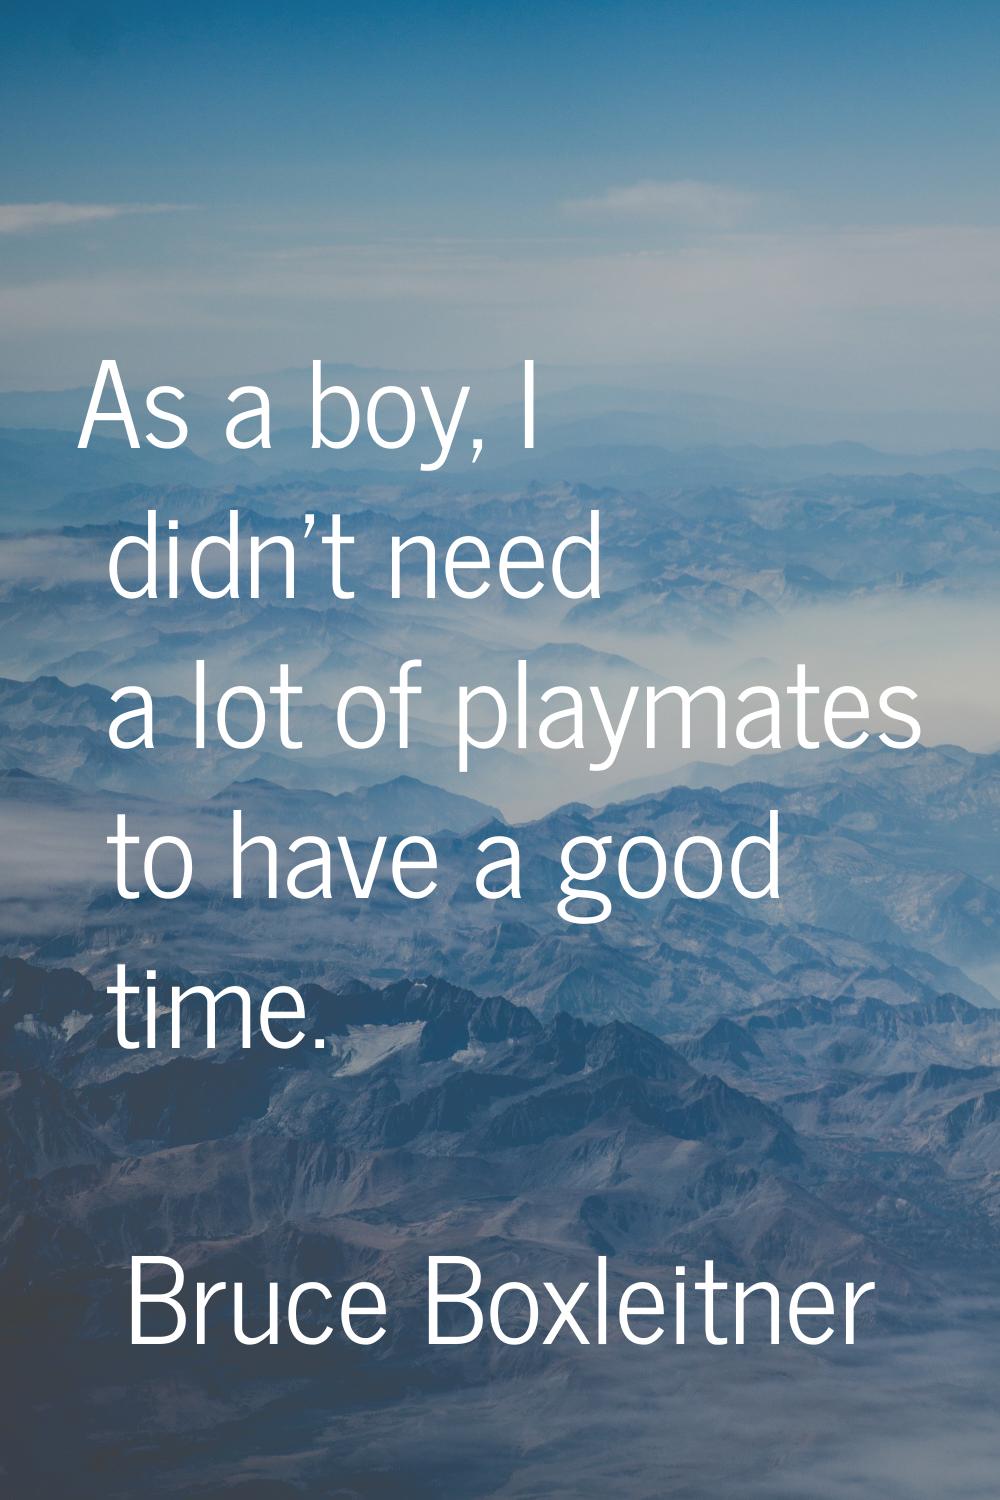 As a boy, I didn't need a lot of playmates to have a good time.